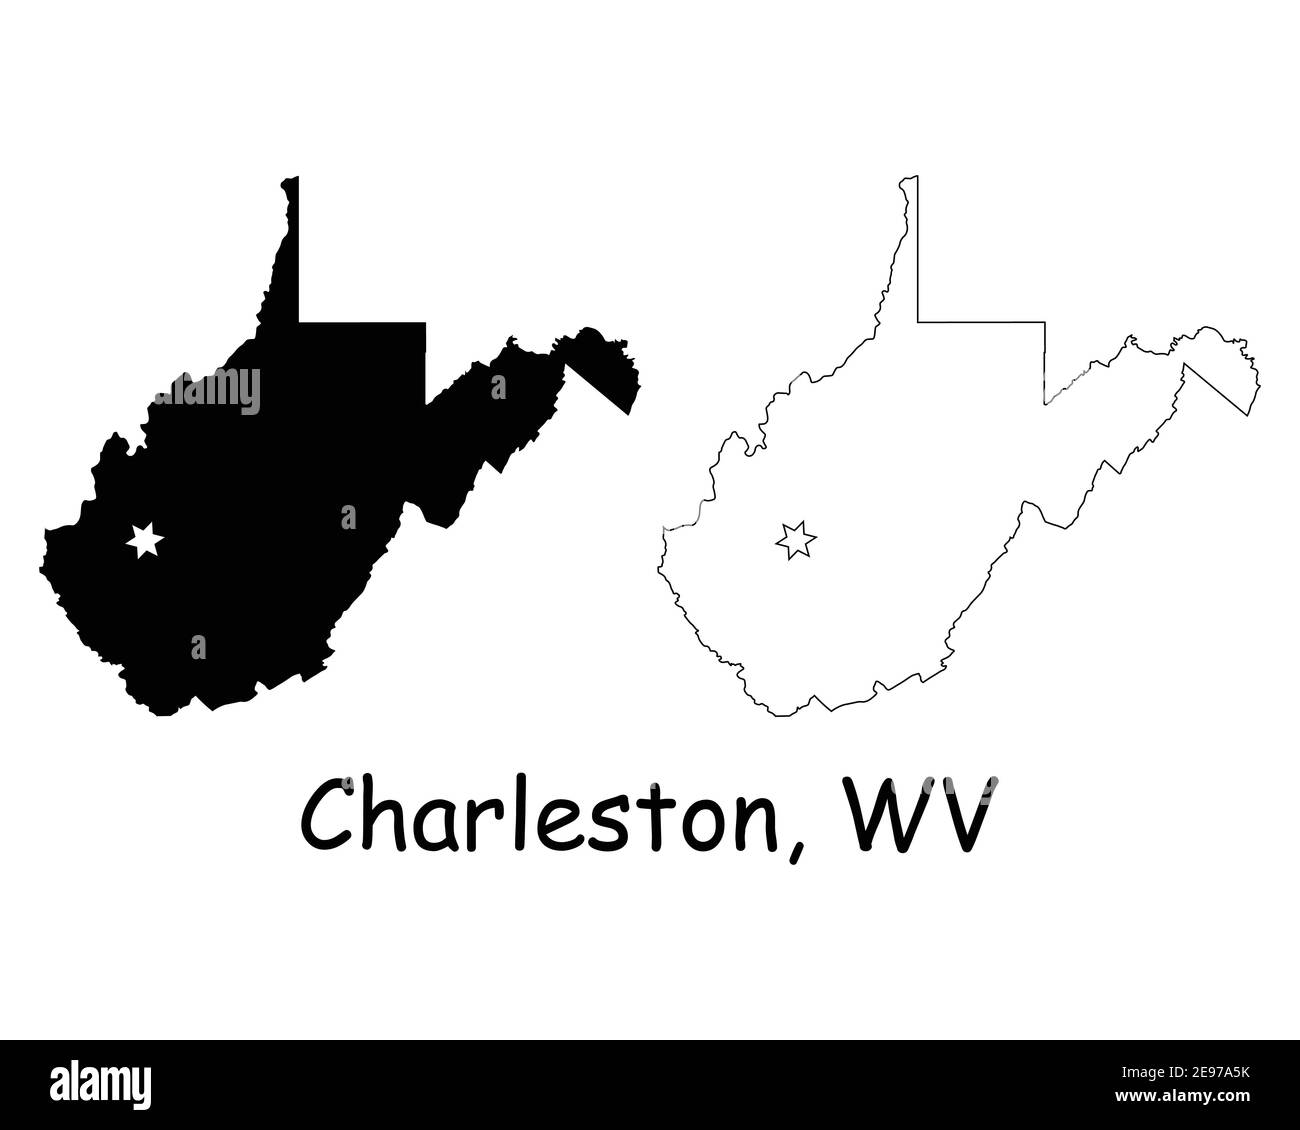 West Virginia WV state Map USA with Capital City Star at Charleston. Black silhouette and outline isolated maps on a white background. EPS Vector Stock Vector